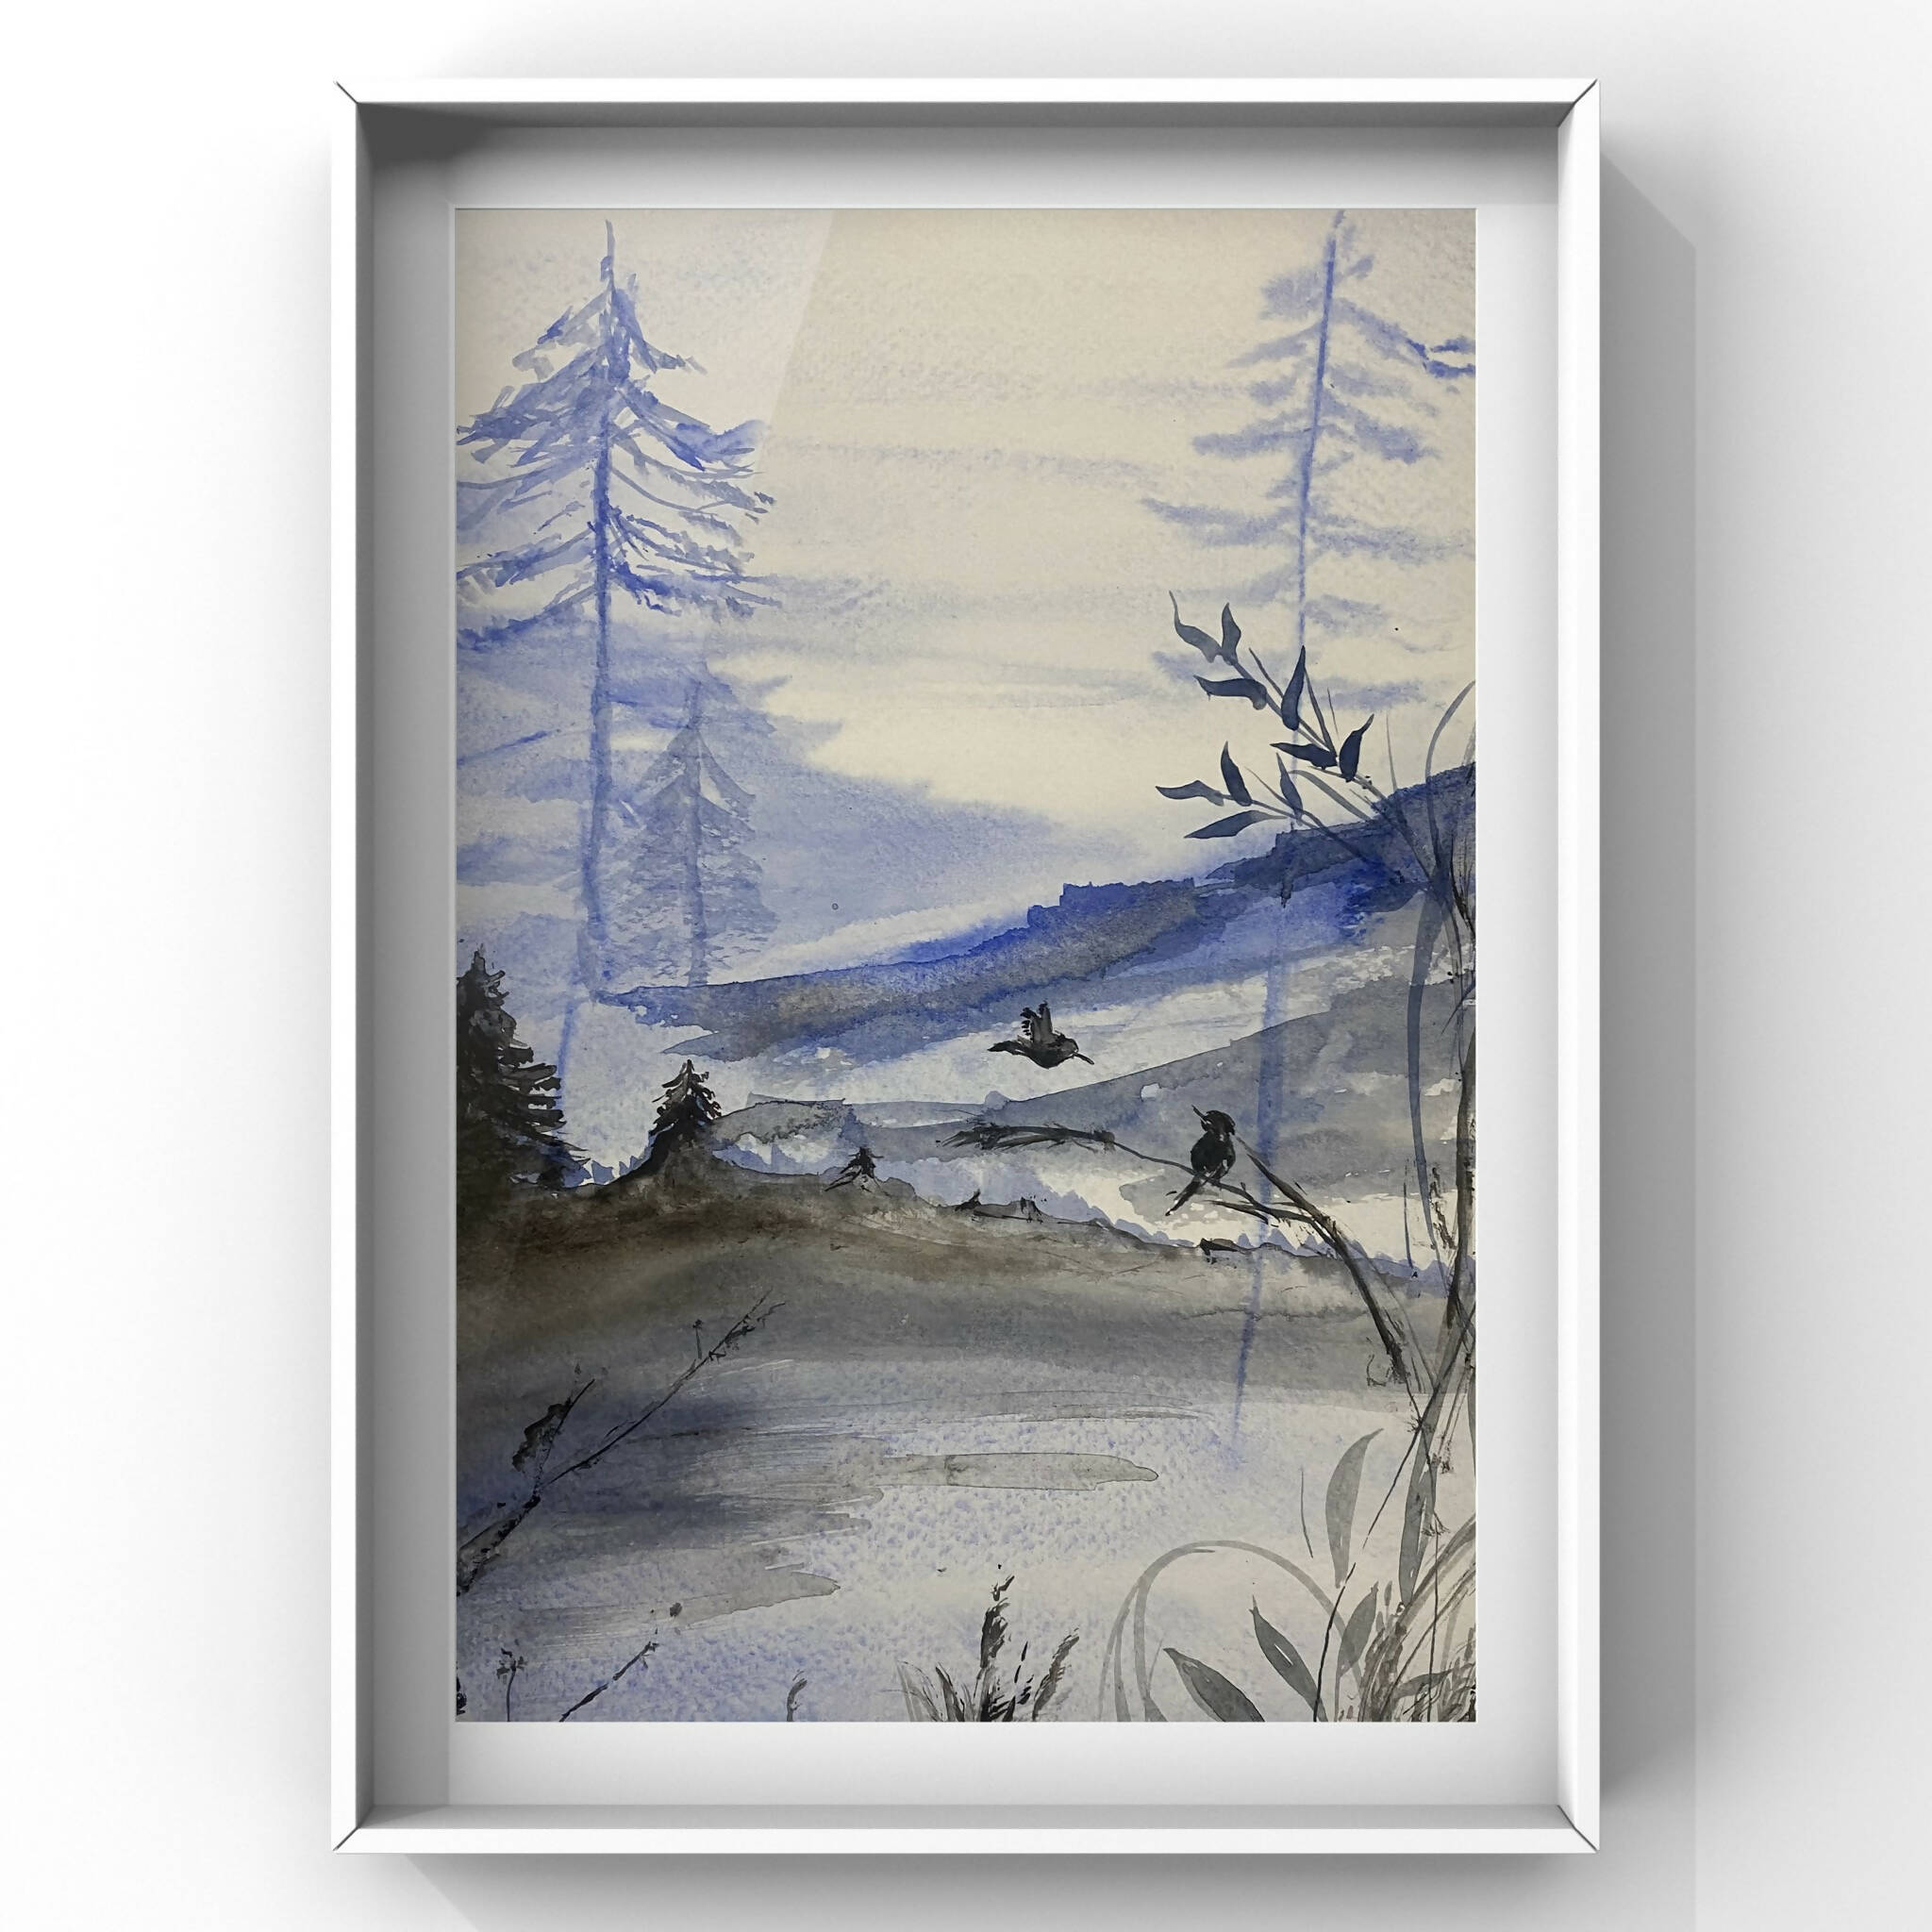 Healing landscape, abstract landscape painting. Watercolour painting